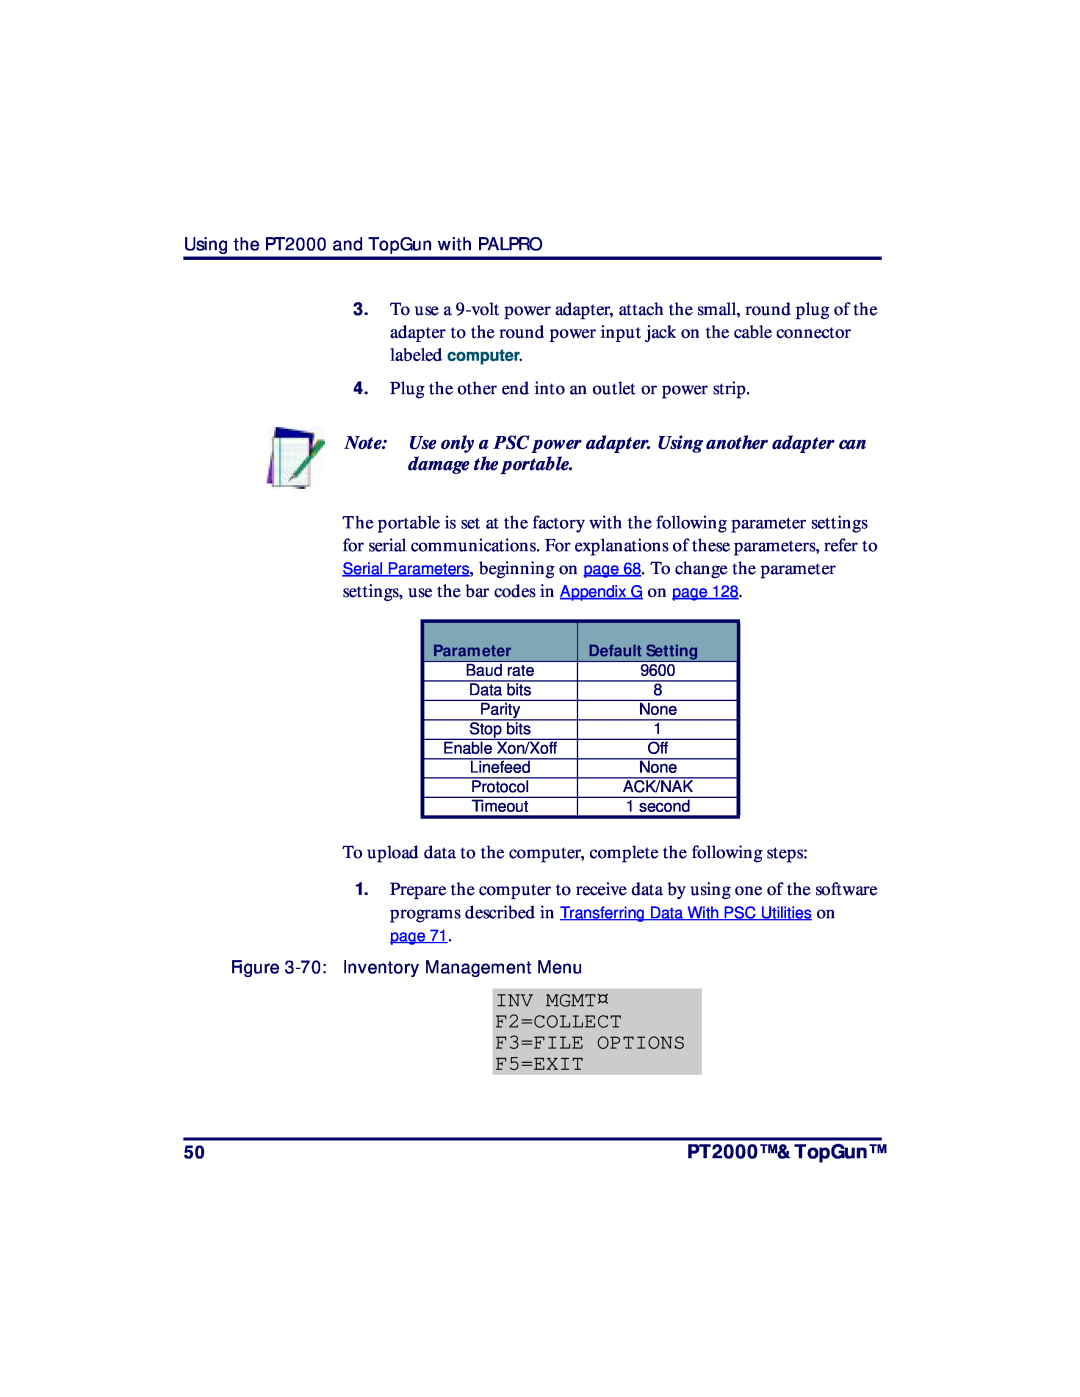 PSC TopGun, PT2000 manual INV MGMT¤ F2=COLLECT F3=FILE OPTIONS F5=EXIT 